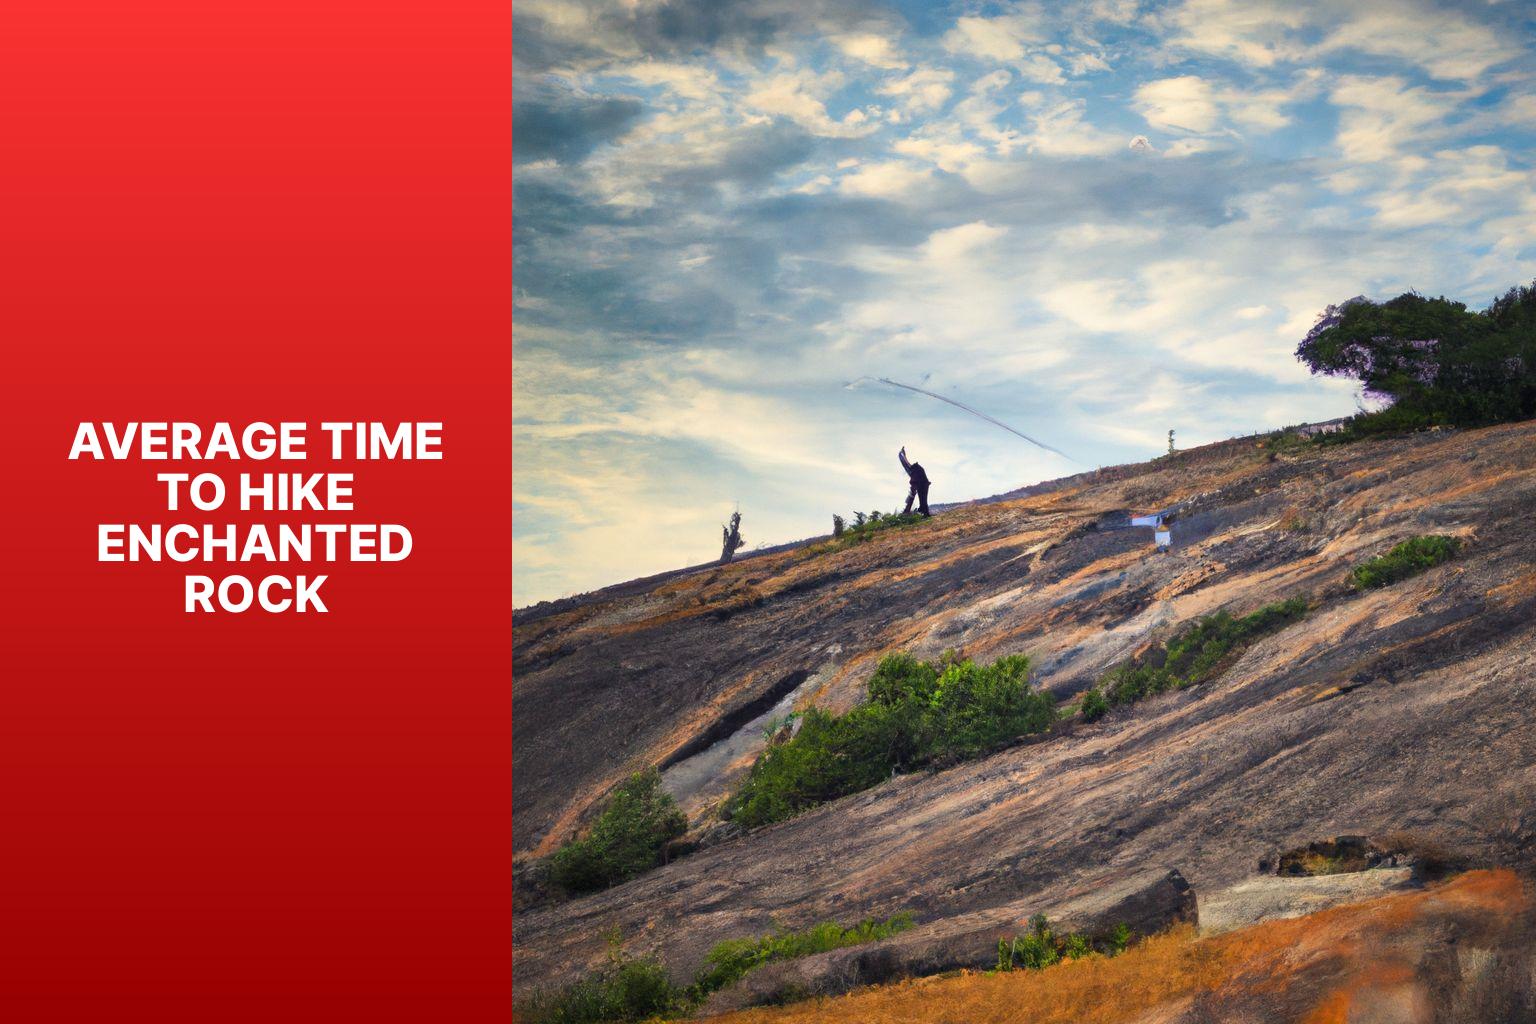 Average Time to Hike Enchanted Rock - How Long Does It Take to Hike Enchanted Rock 